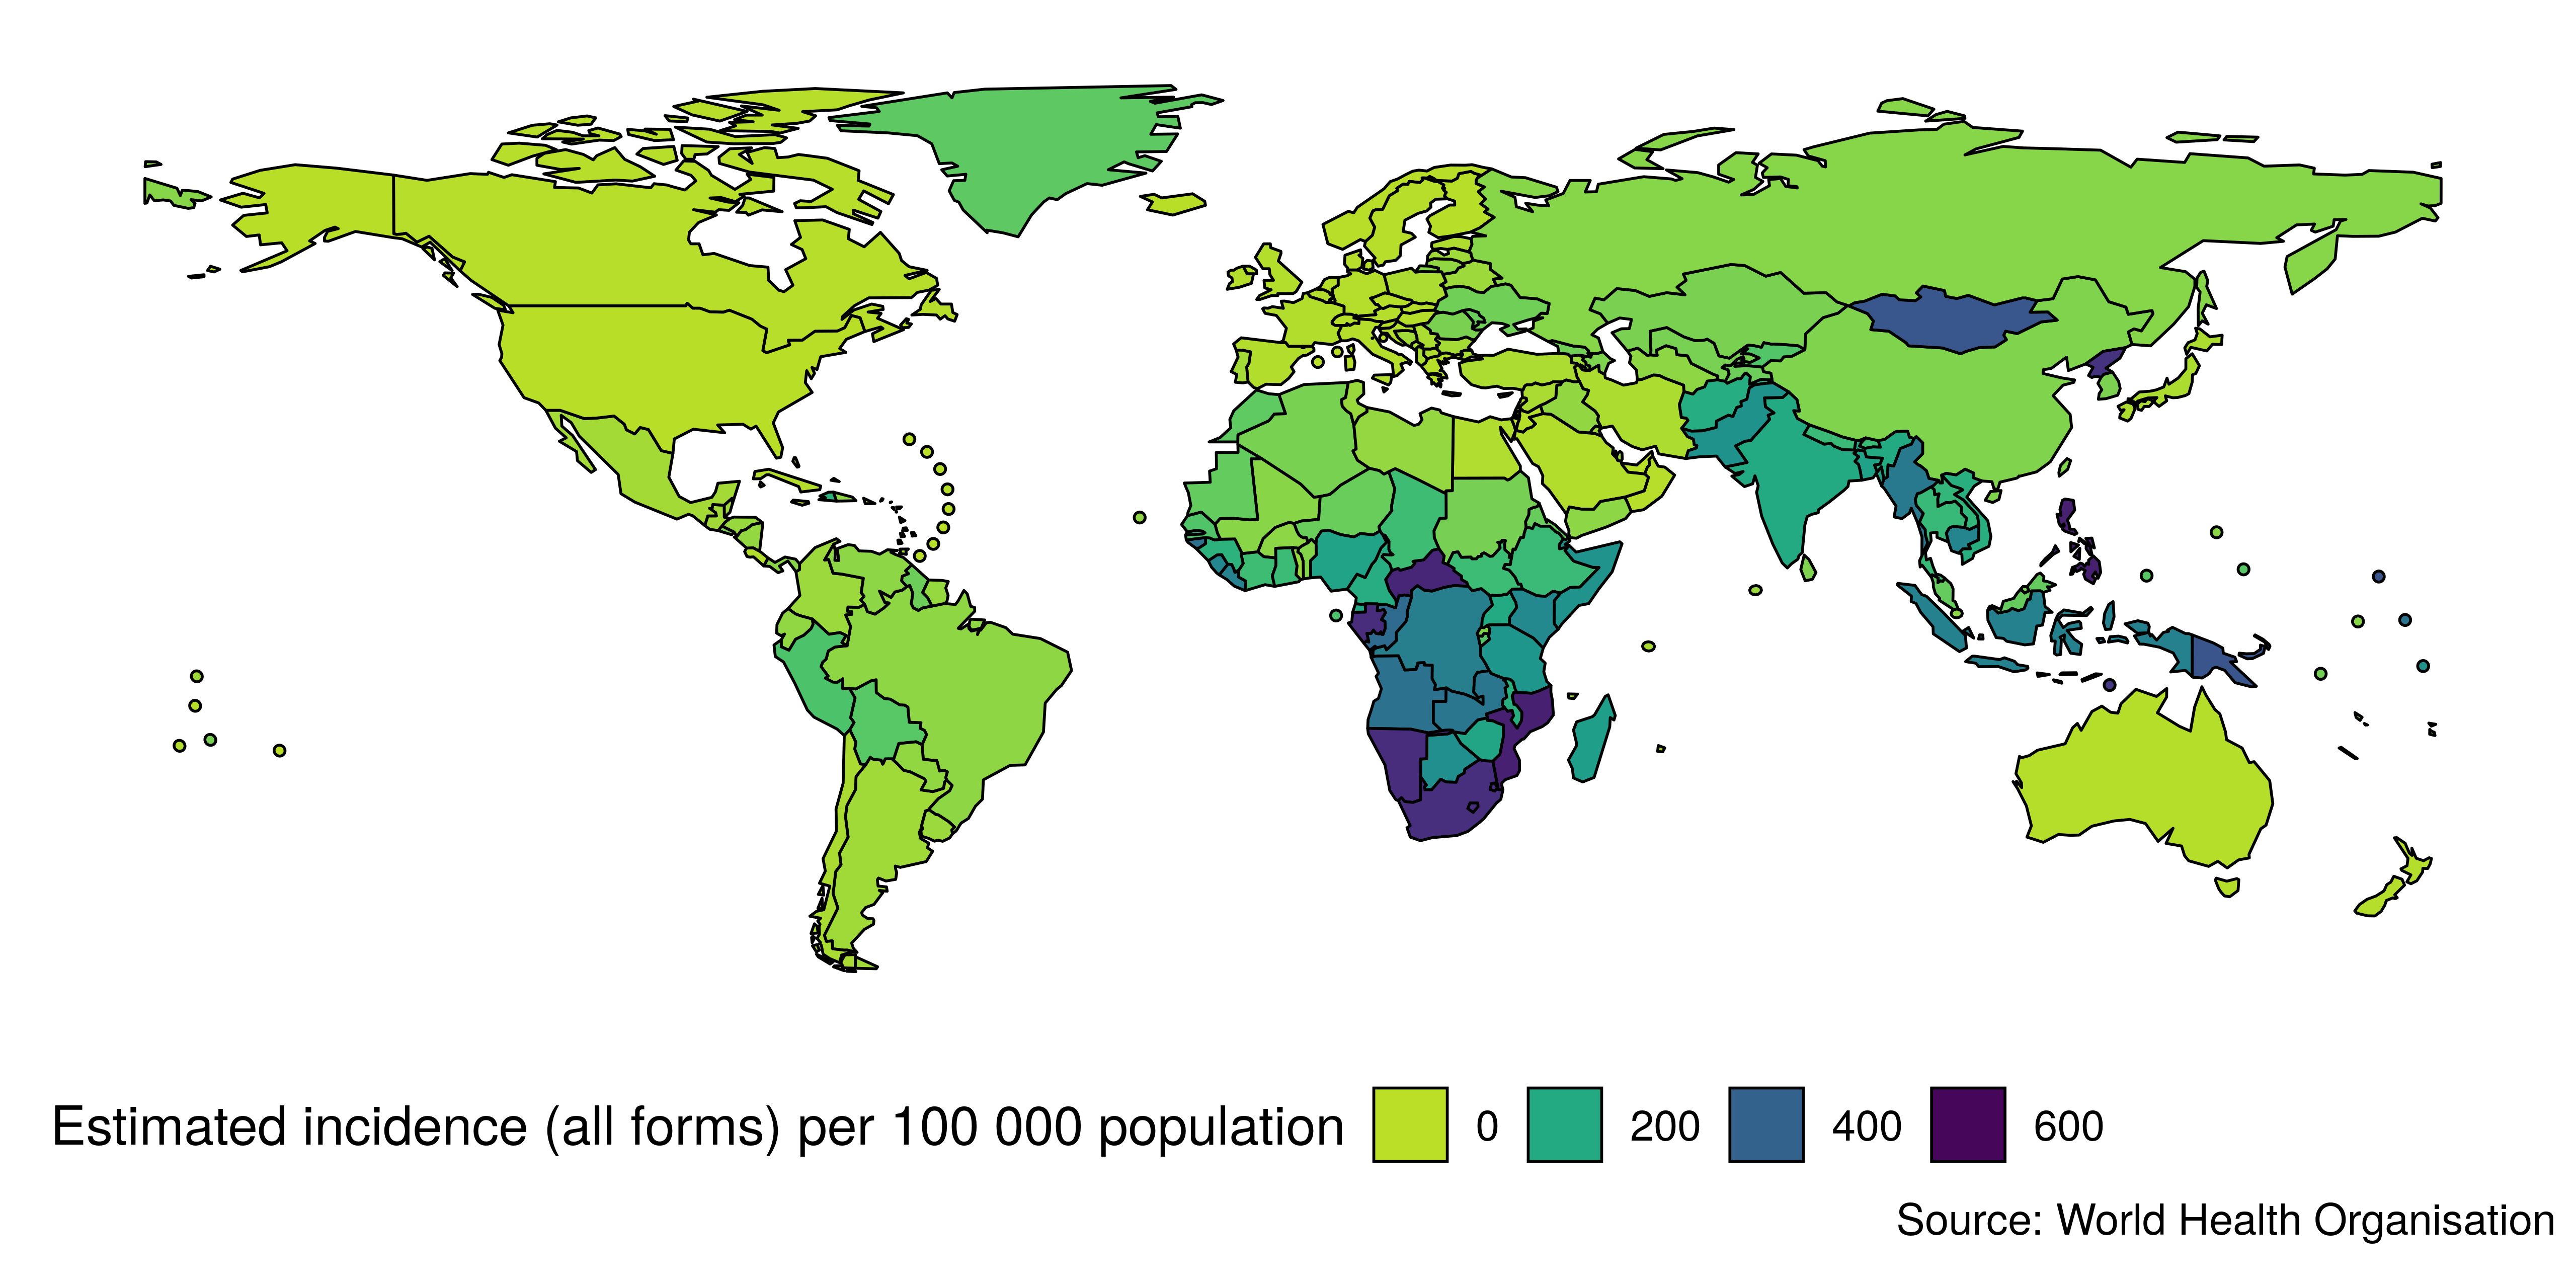 Global map of country level TB incidence rates (per 100,000 population) in 2017. Note the clustering of countries with high incidence rates in southern and central Africa and southern Asia. Incidence rates in the legend refer to the lower bound for each colour.